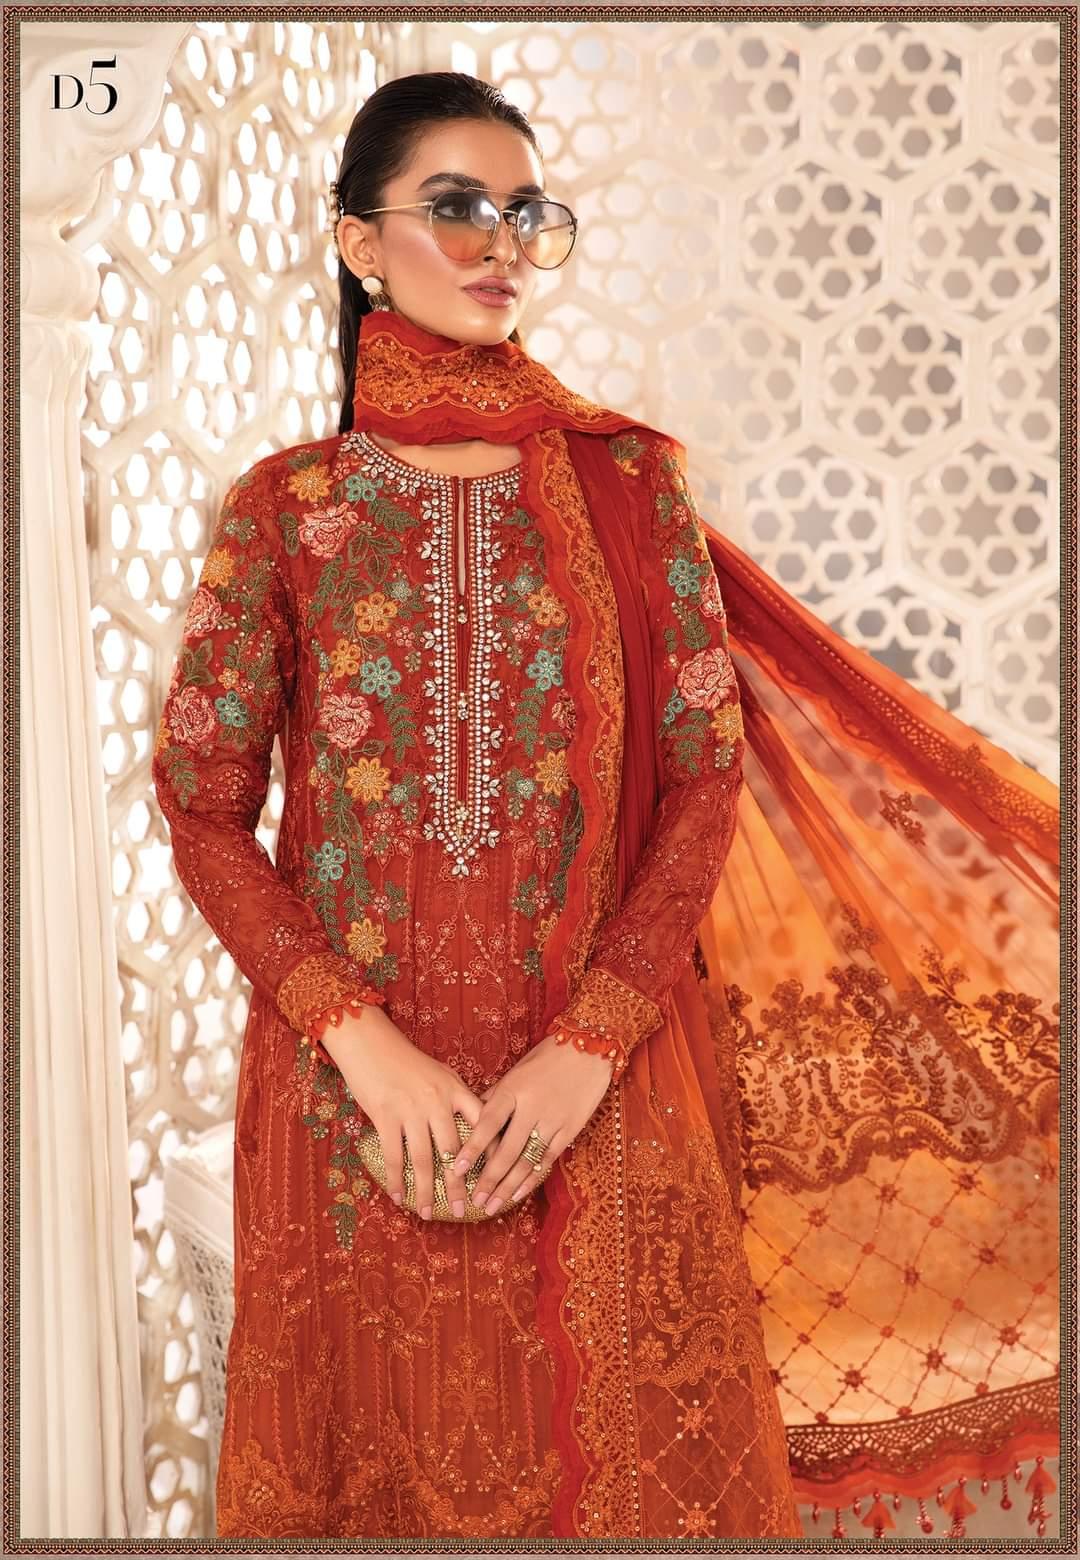 Maria.B Chiffons Collection'22- Design #2- Burnt Orange and Rust - Maria.B Chiffons Collection'22- Design #2- Burnt Orange and Rust - Shahana Collection